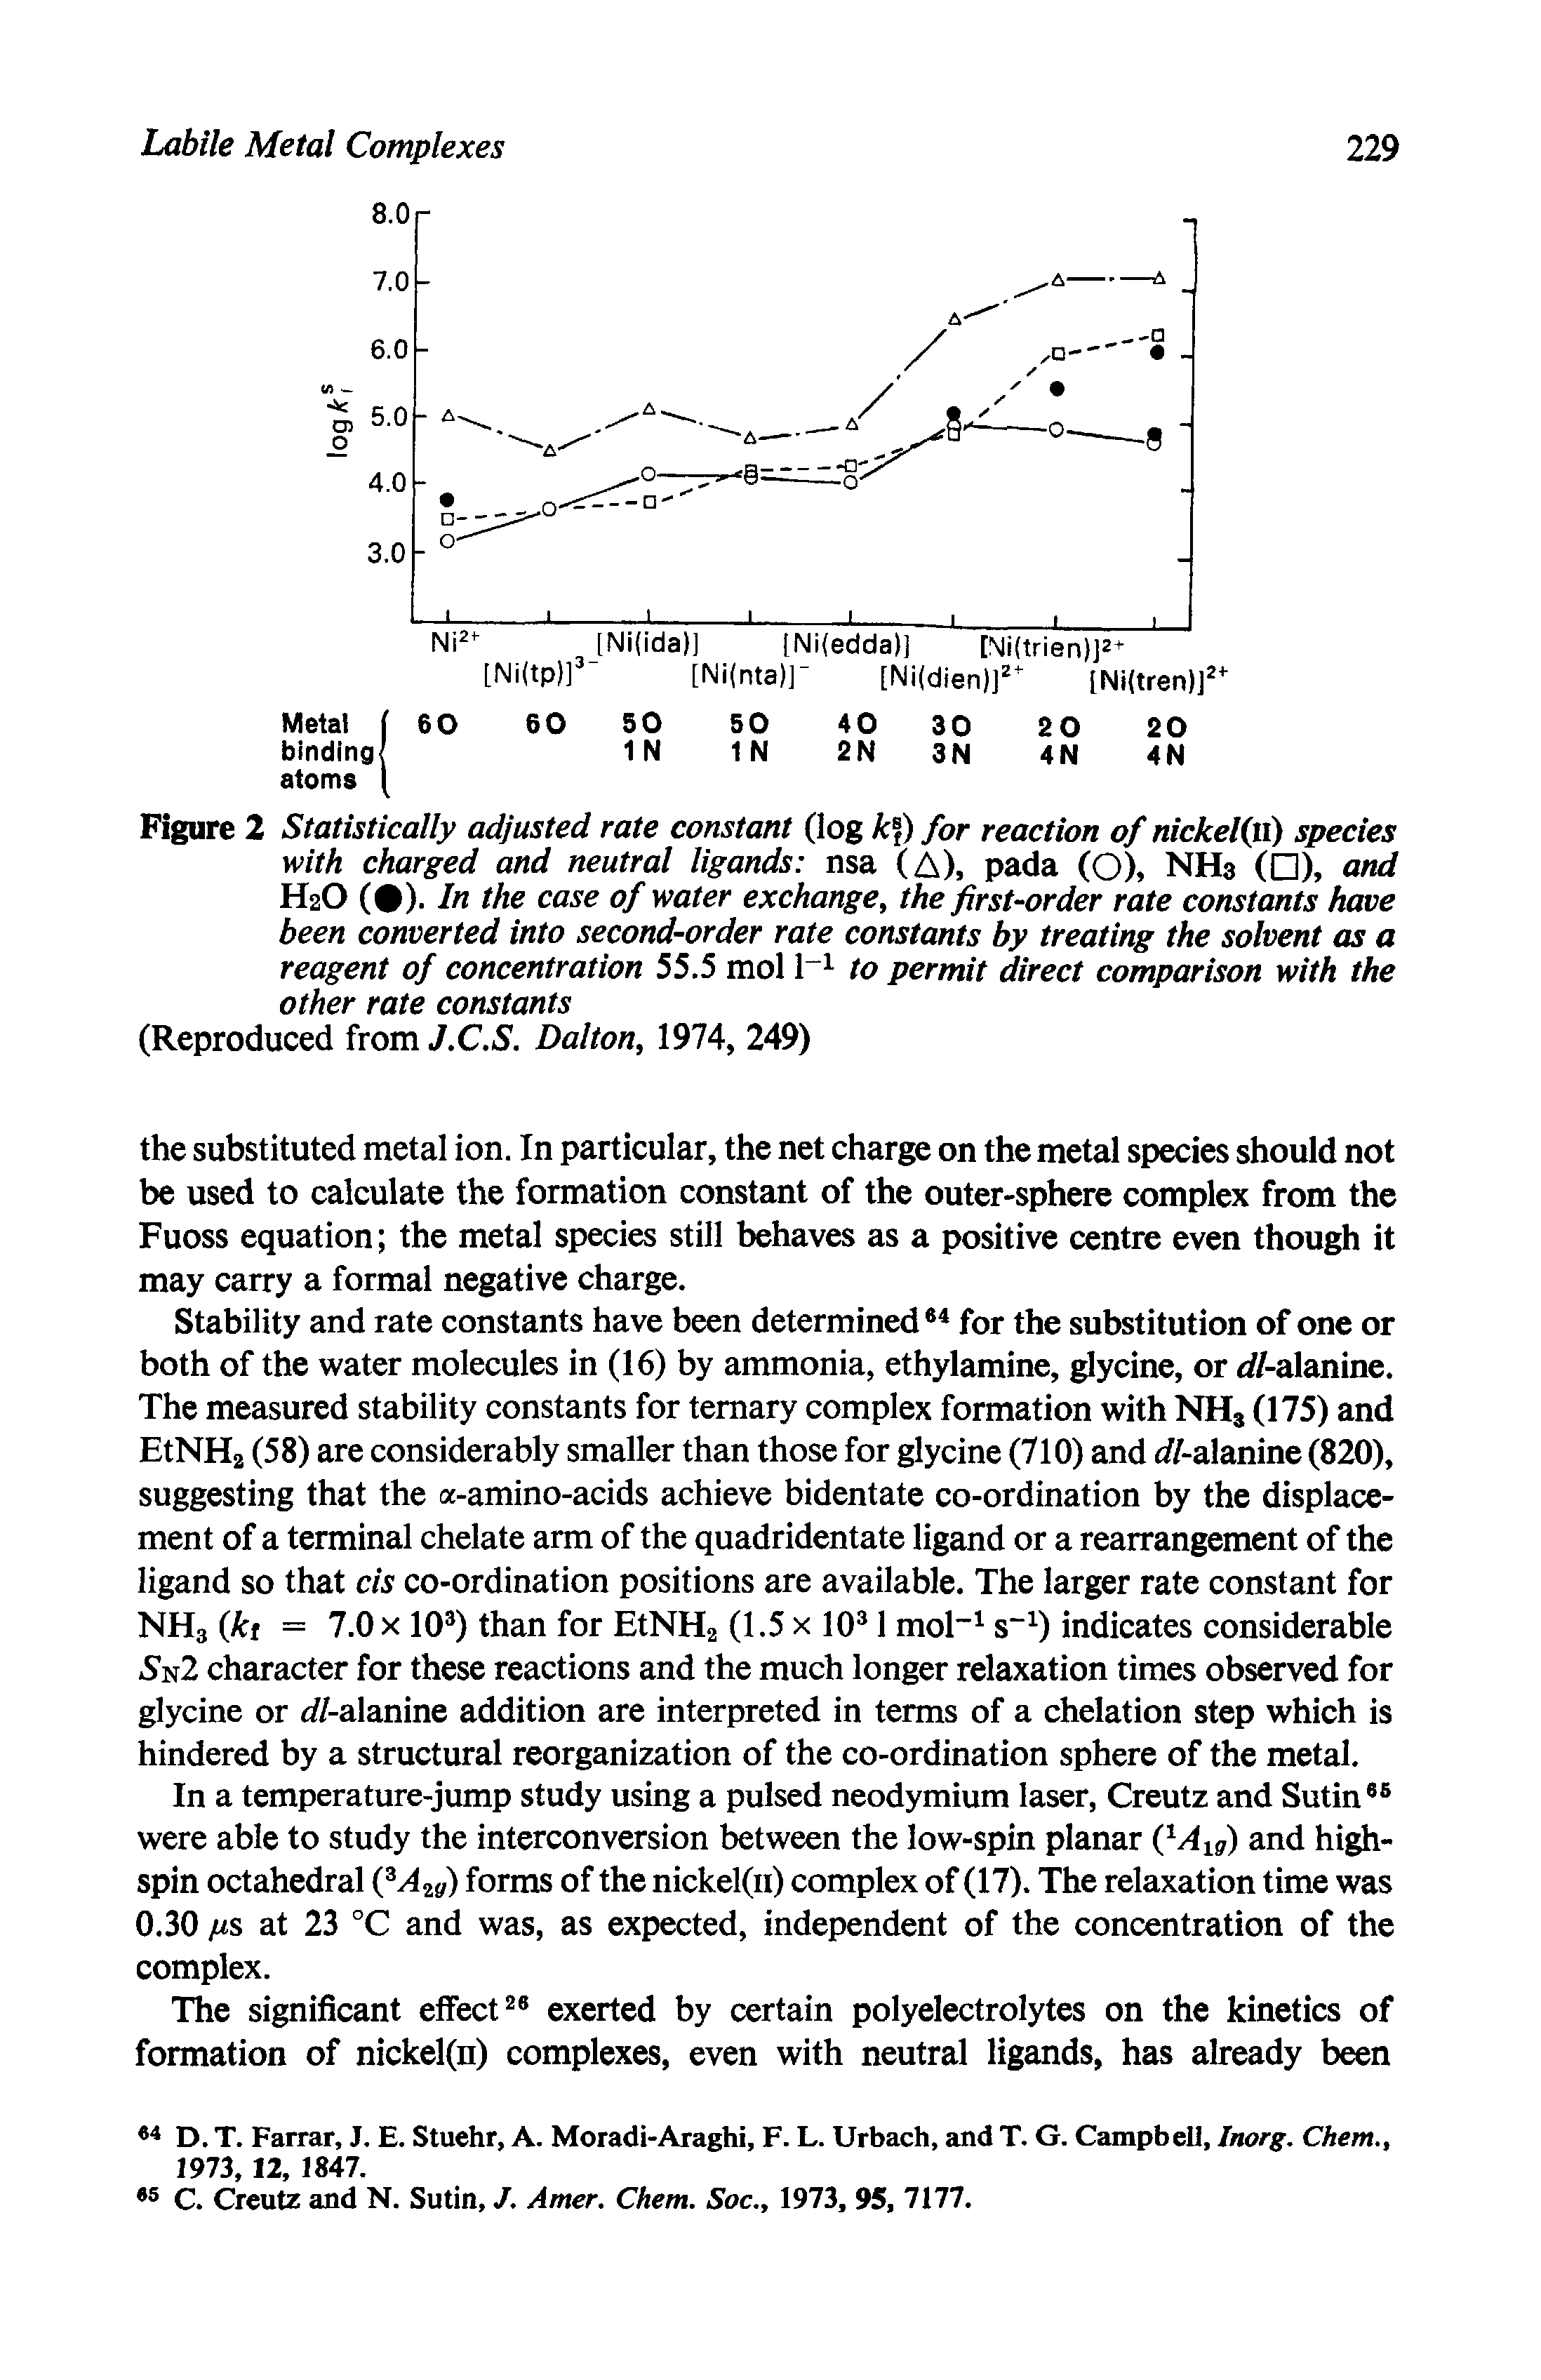 Figure 2 Statistically adjusted rate constant (log A f) for reaction of nickel(u) species with charged and neutral ligands nsa (A), pada (O), NH3 ( ), and H2O ( ). In the case of water exchange the first-order rate constants have been converted into second-order rate constants by treating the solvent as a reagent of concentration 55.5 mol 1 to permit direct comparison with the other rate constants...